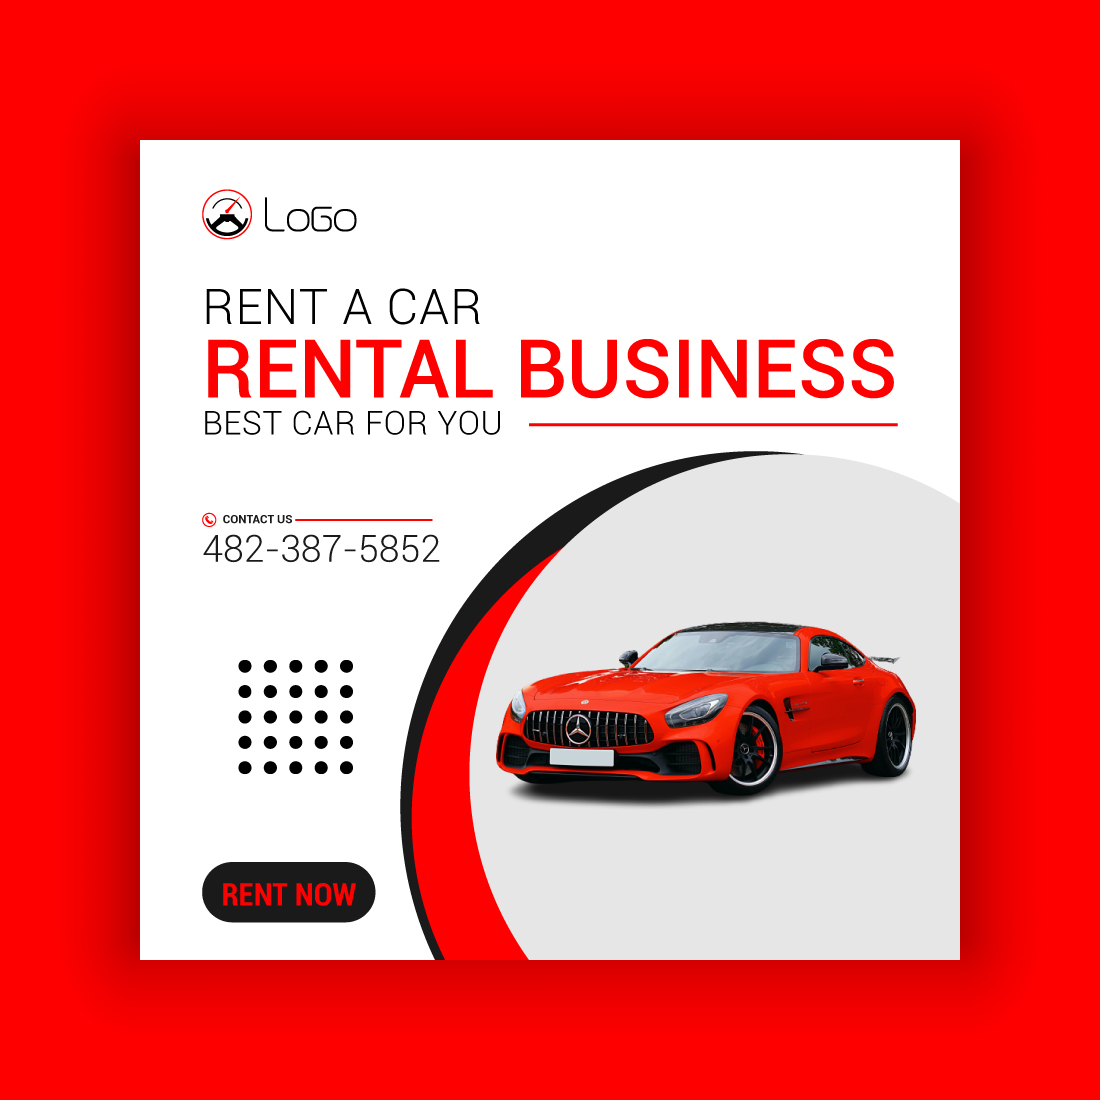 Rent A Car and Rental Business Social Media Post Template Bundle cover image.